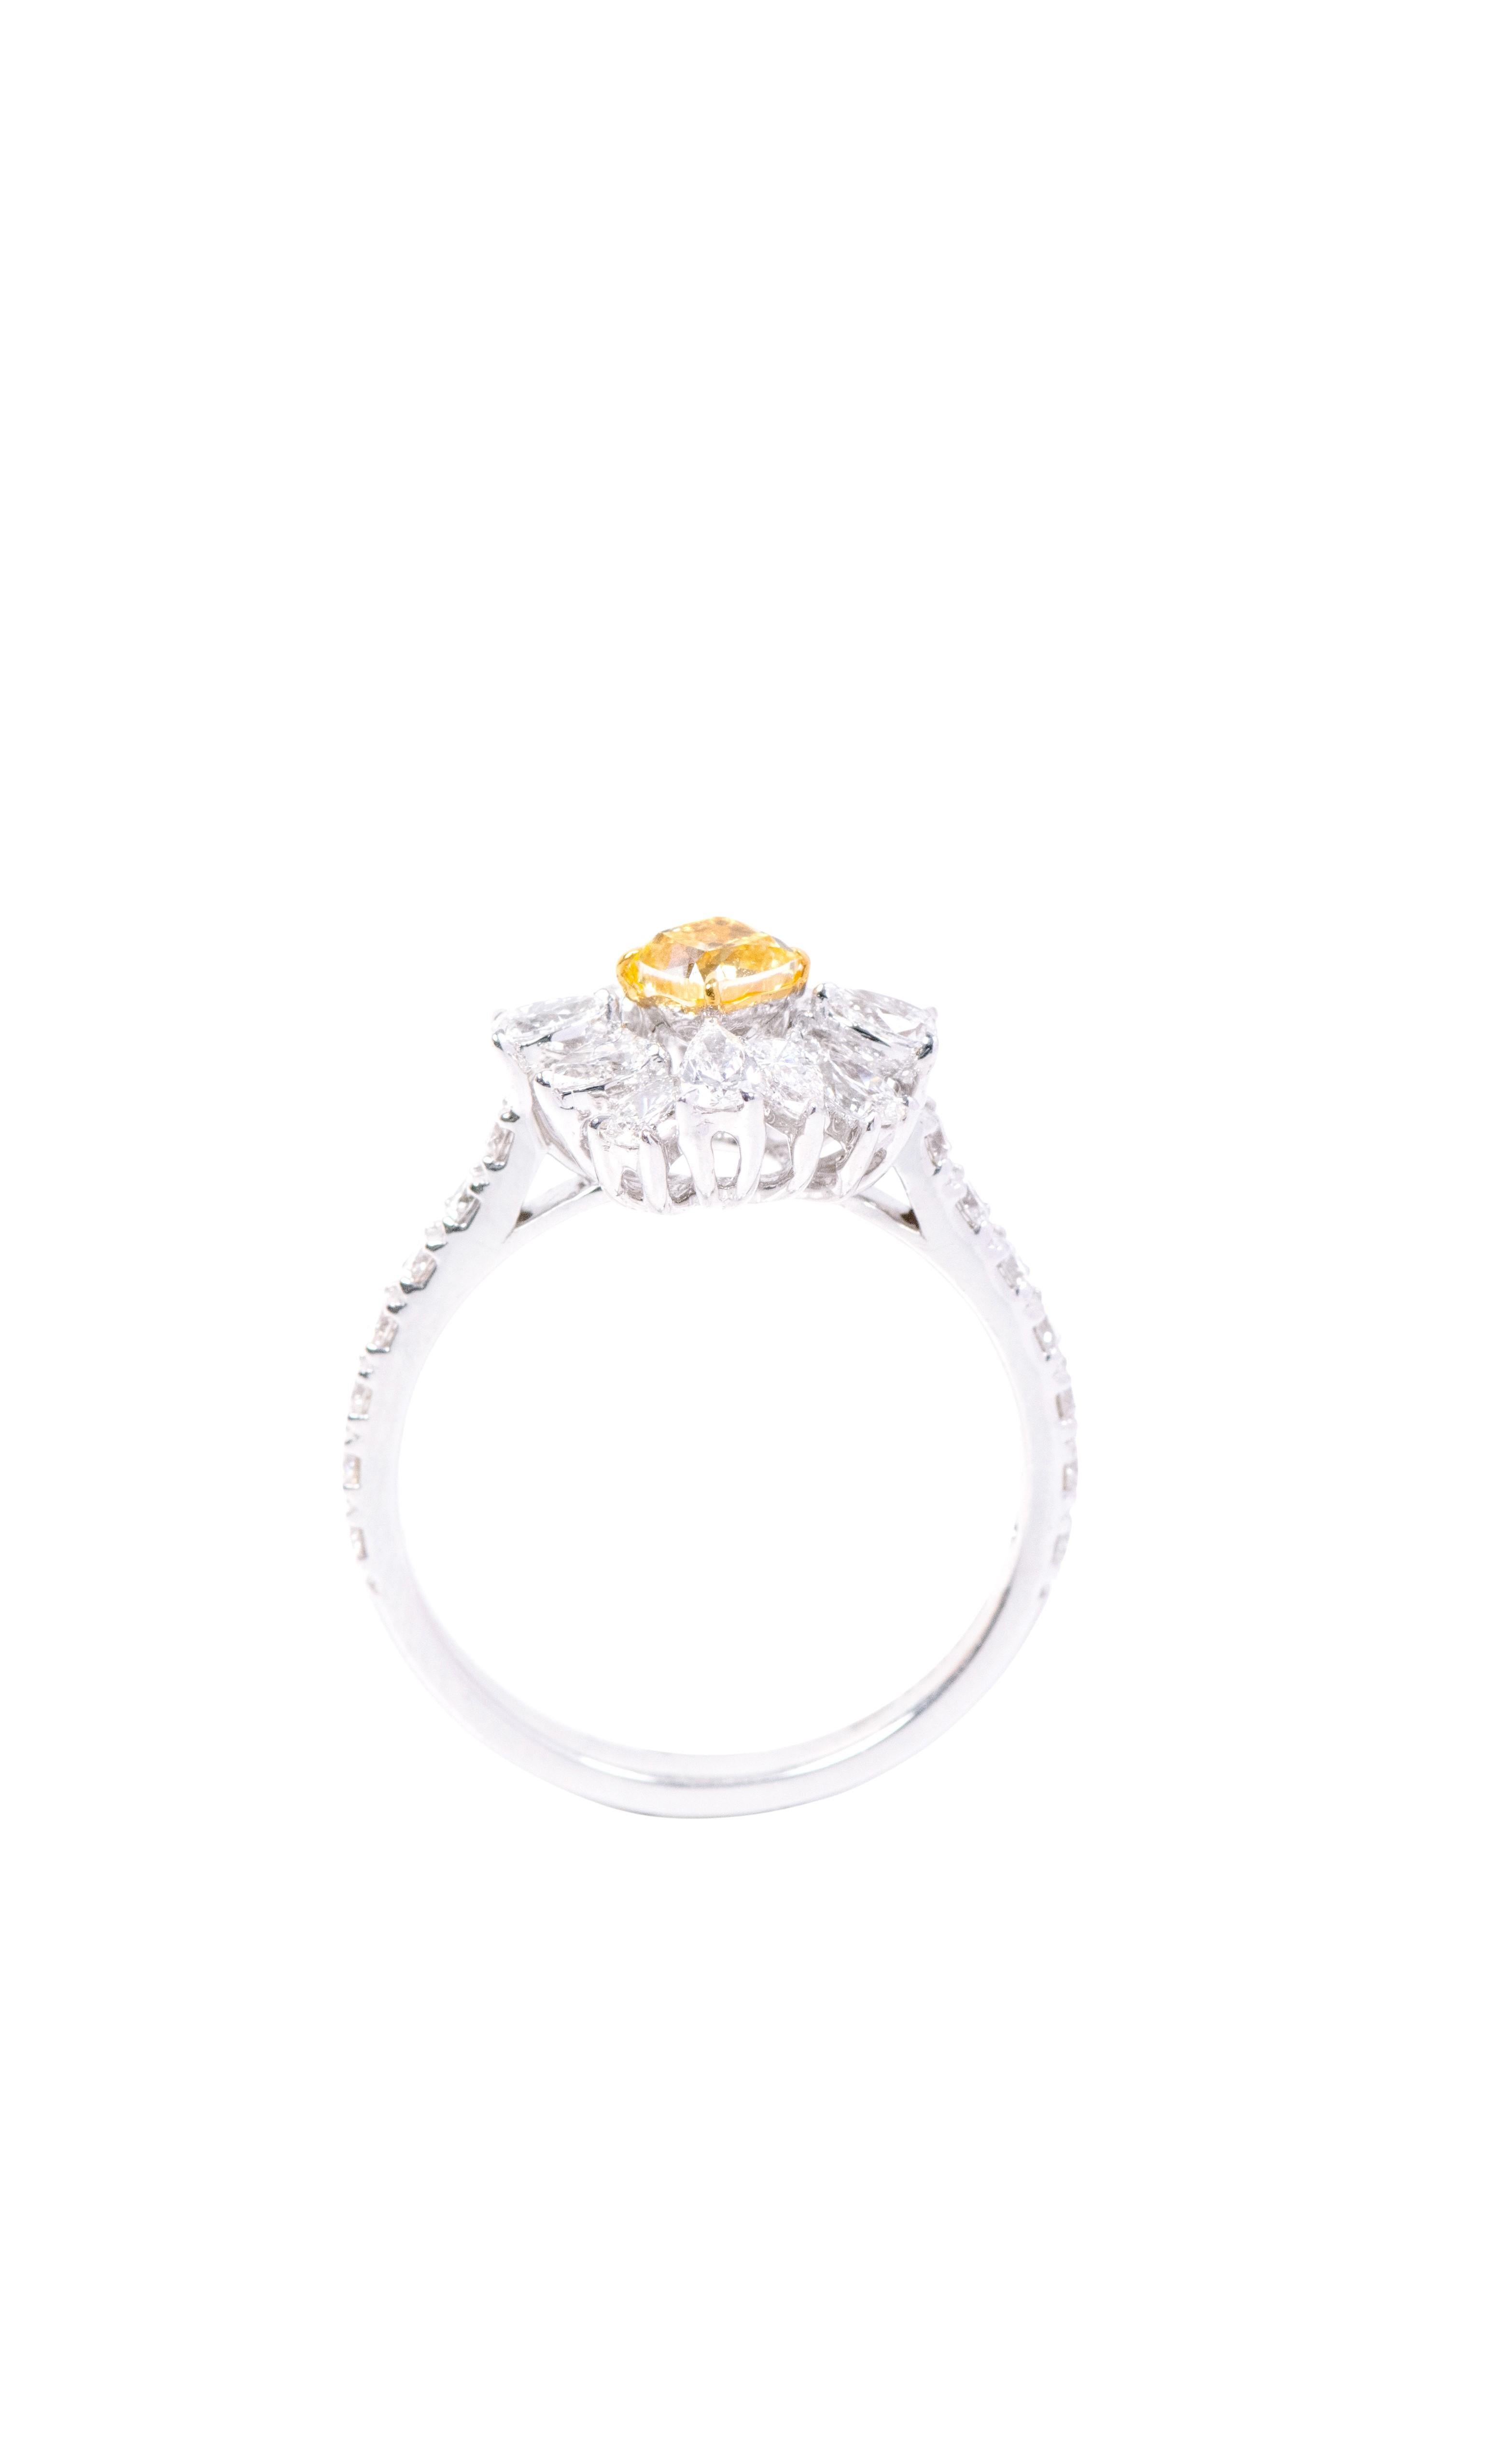 Welcome to the epitome of elegance—the 18 Karat Gold 2.706 Carat Fancy Yellow Diamond and Diamond Flower Ring. Our skilled artisans have meticulously crafted this piece, ensuring that each ring is a unique representation of timeless beauty.

At the